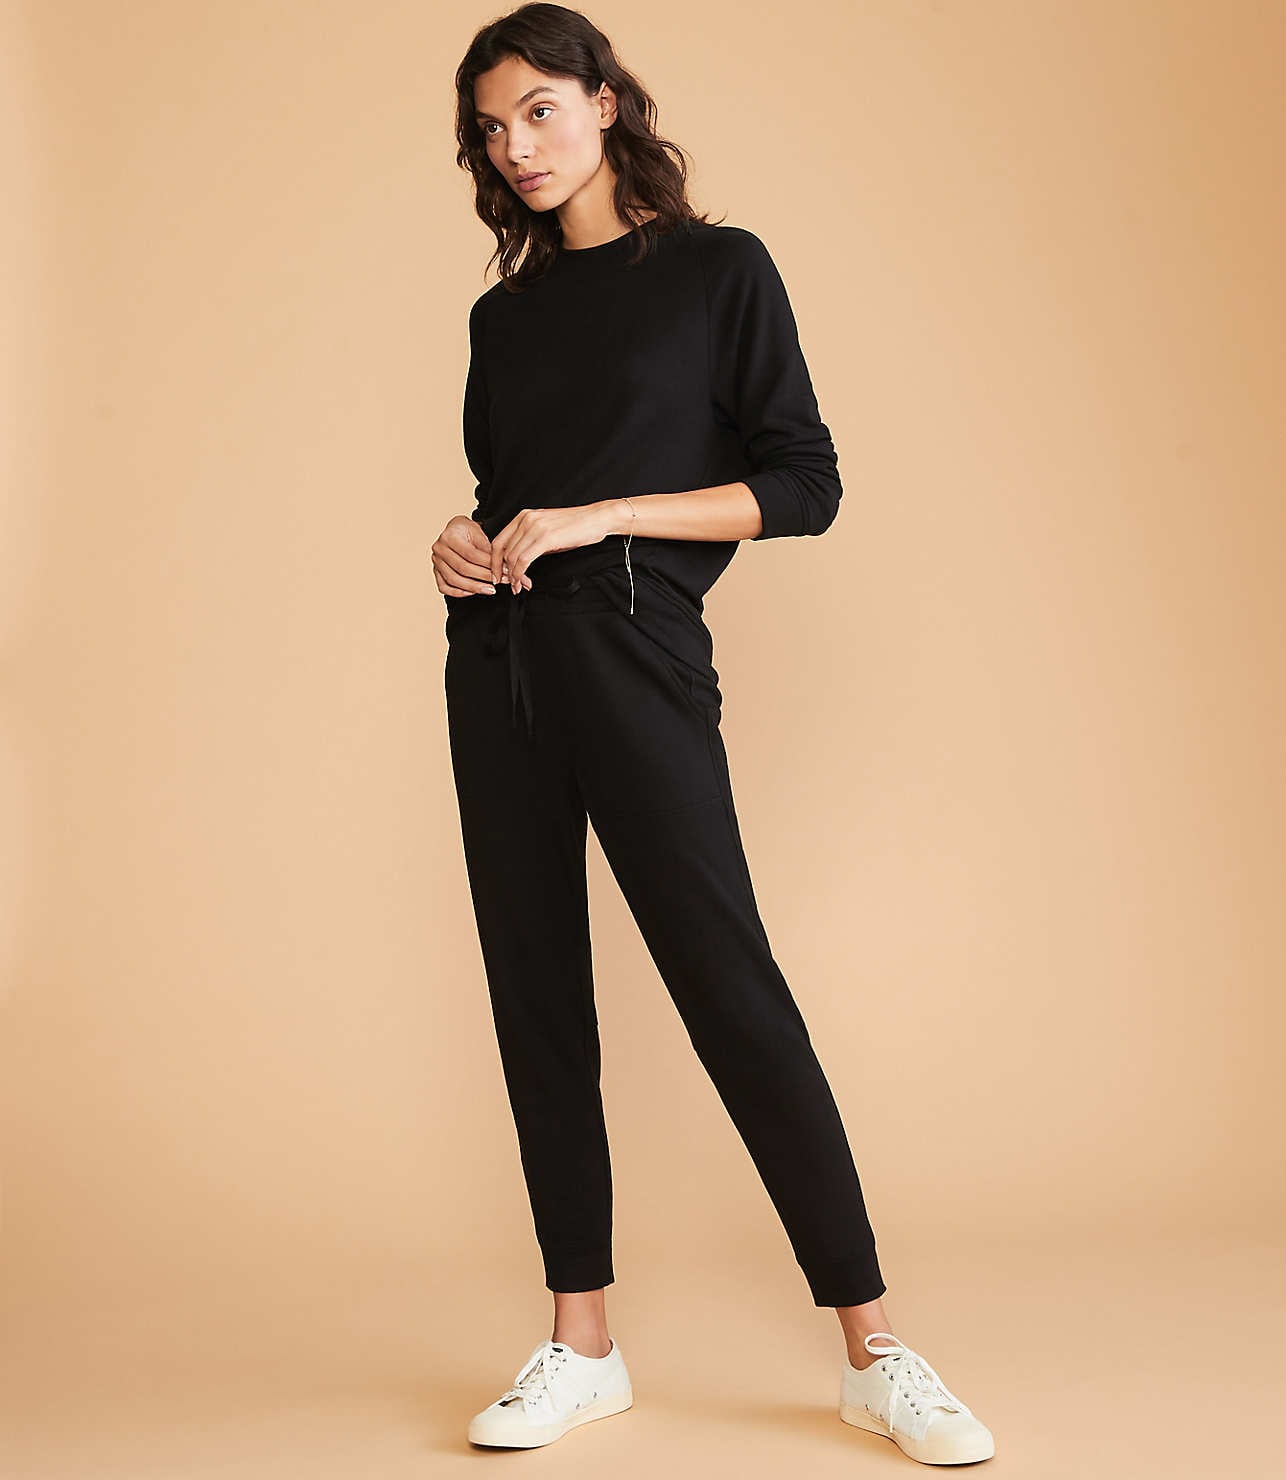 Most Comfortable Stretchy Pants For Women